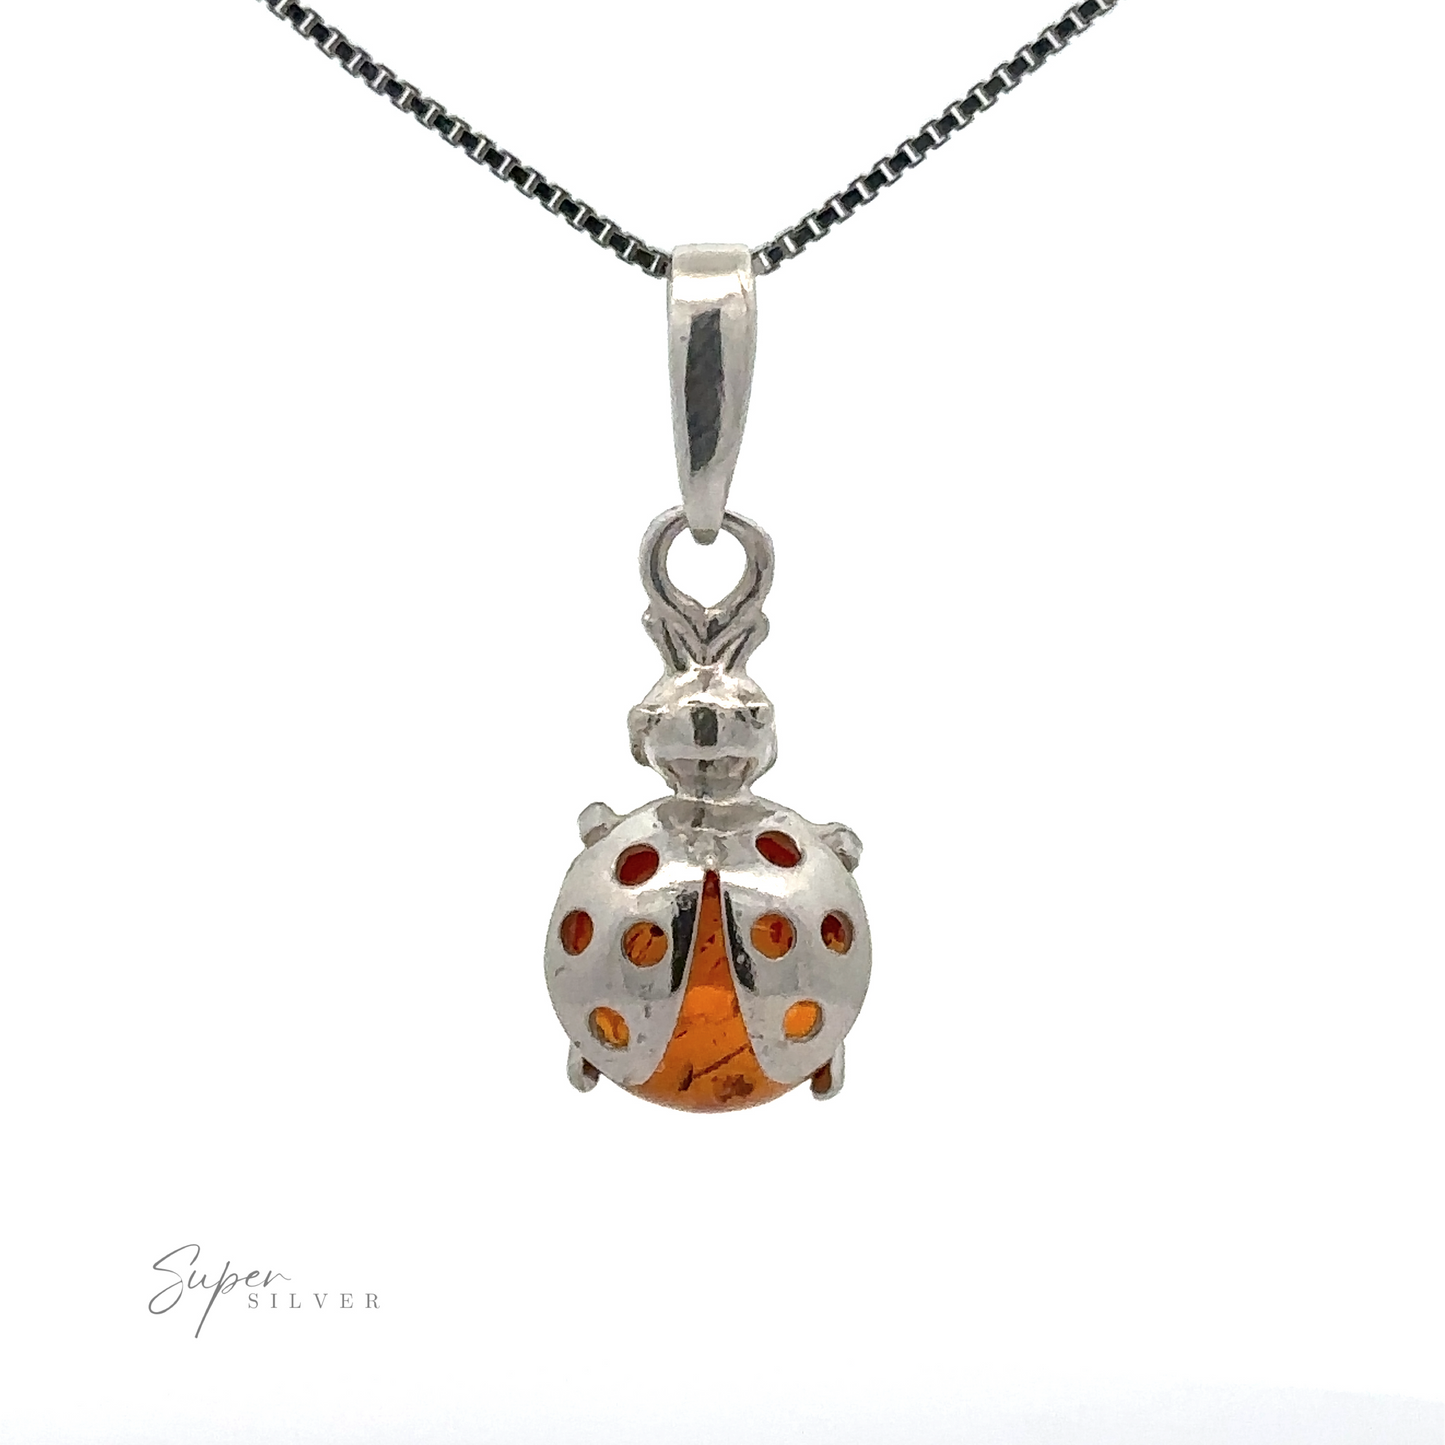 
                  
                    A sterling silver **Amber Ladybug Pendant** hangs on a silver chain. The background is white. The text "Super Silver" is visible at the bottom left.
                  
                